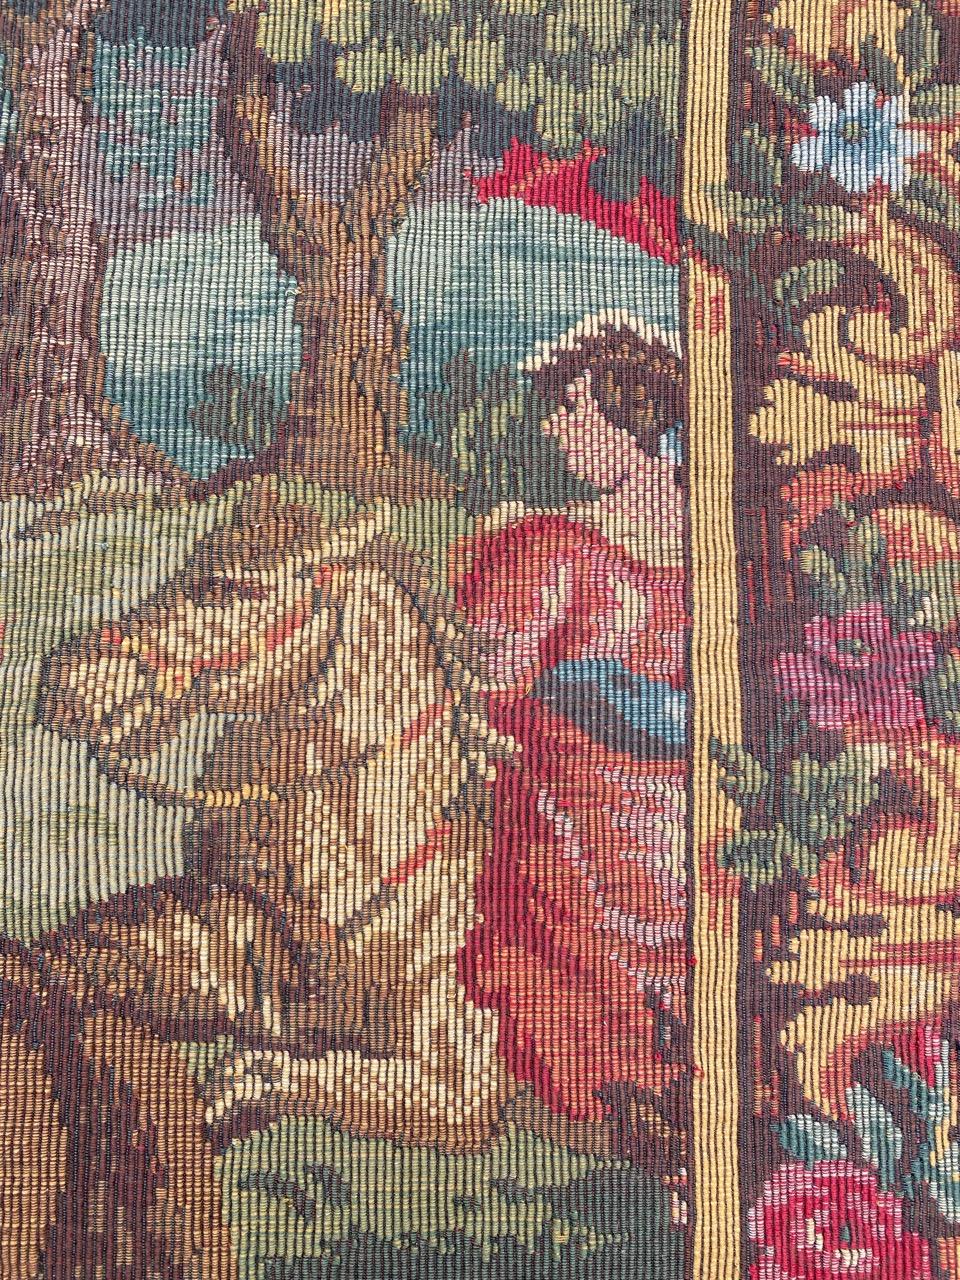 Wool Bobyrug’s Vintage Aubusson Style French Jaquar Tapestry For Sale